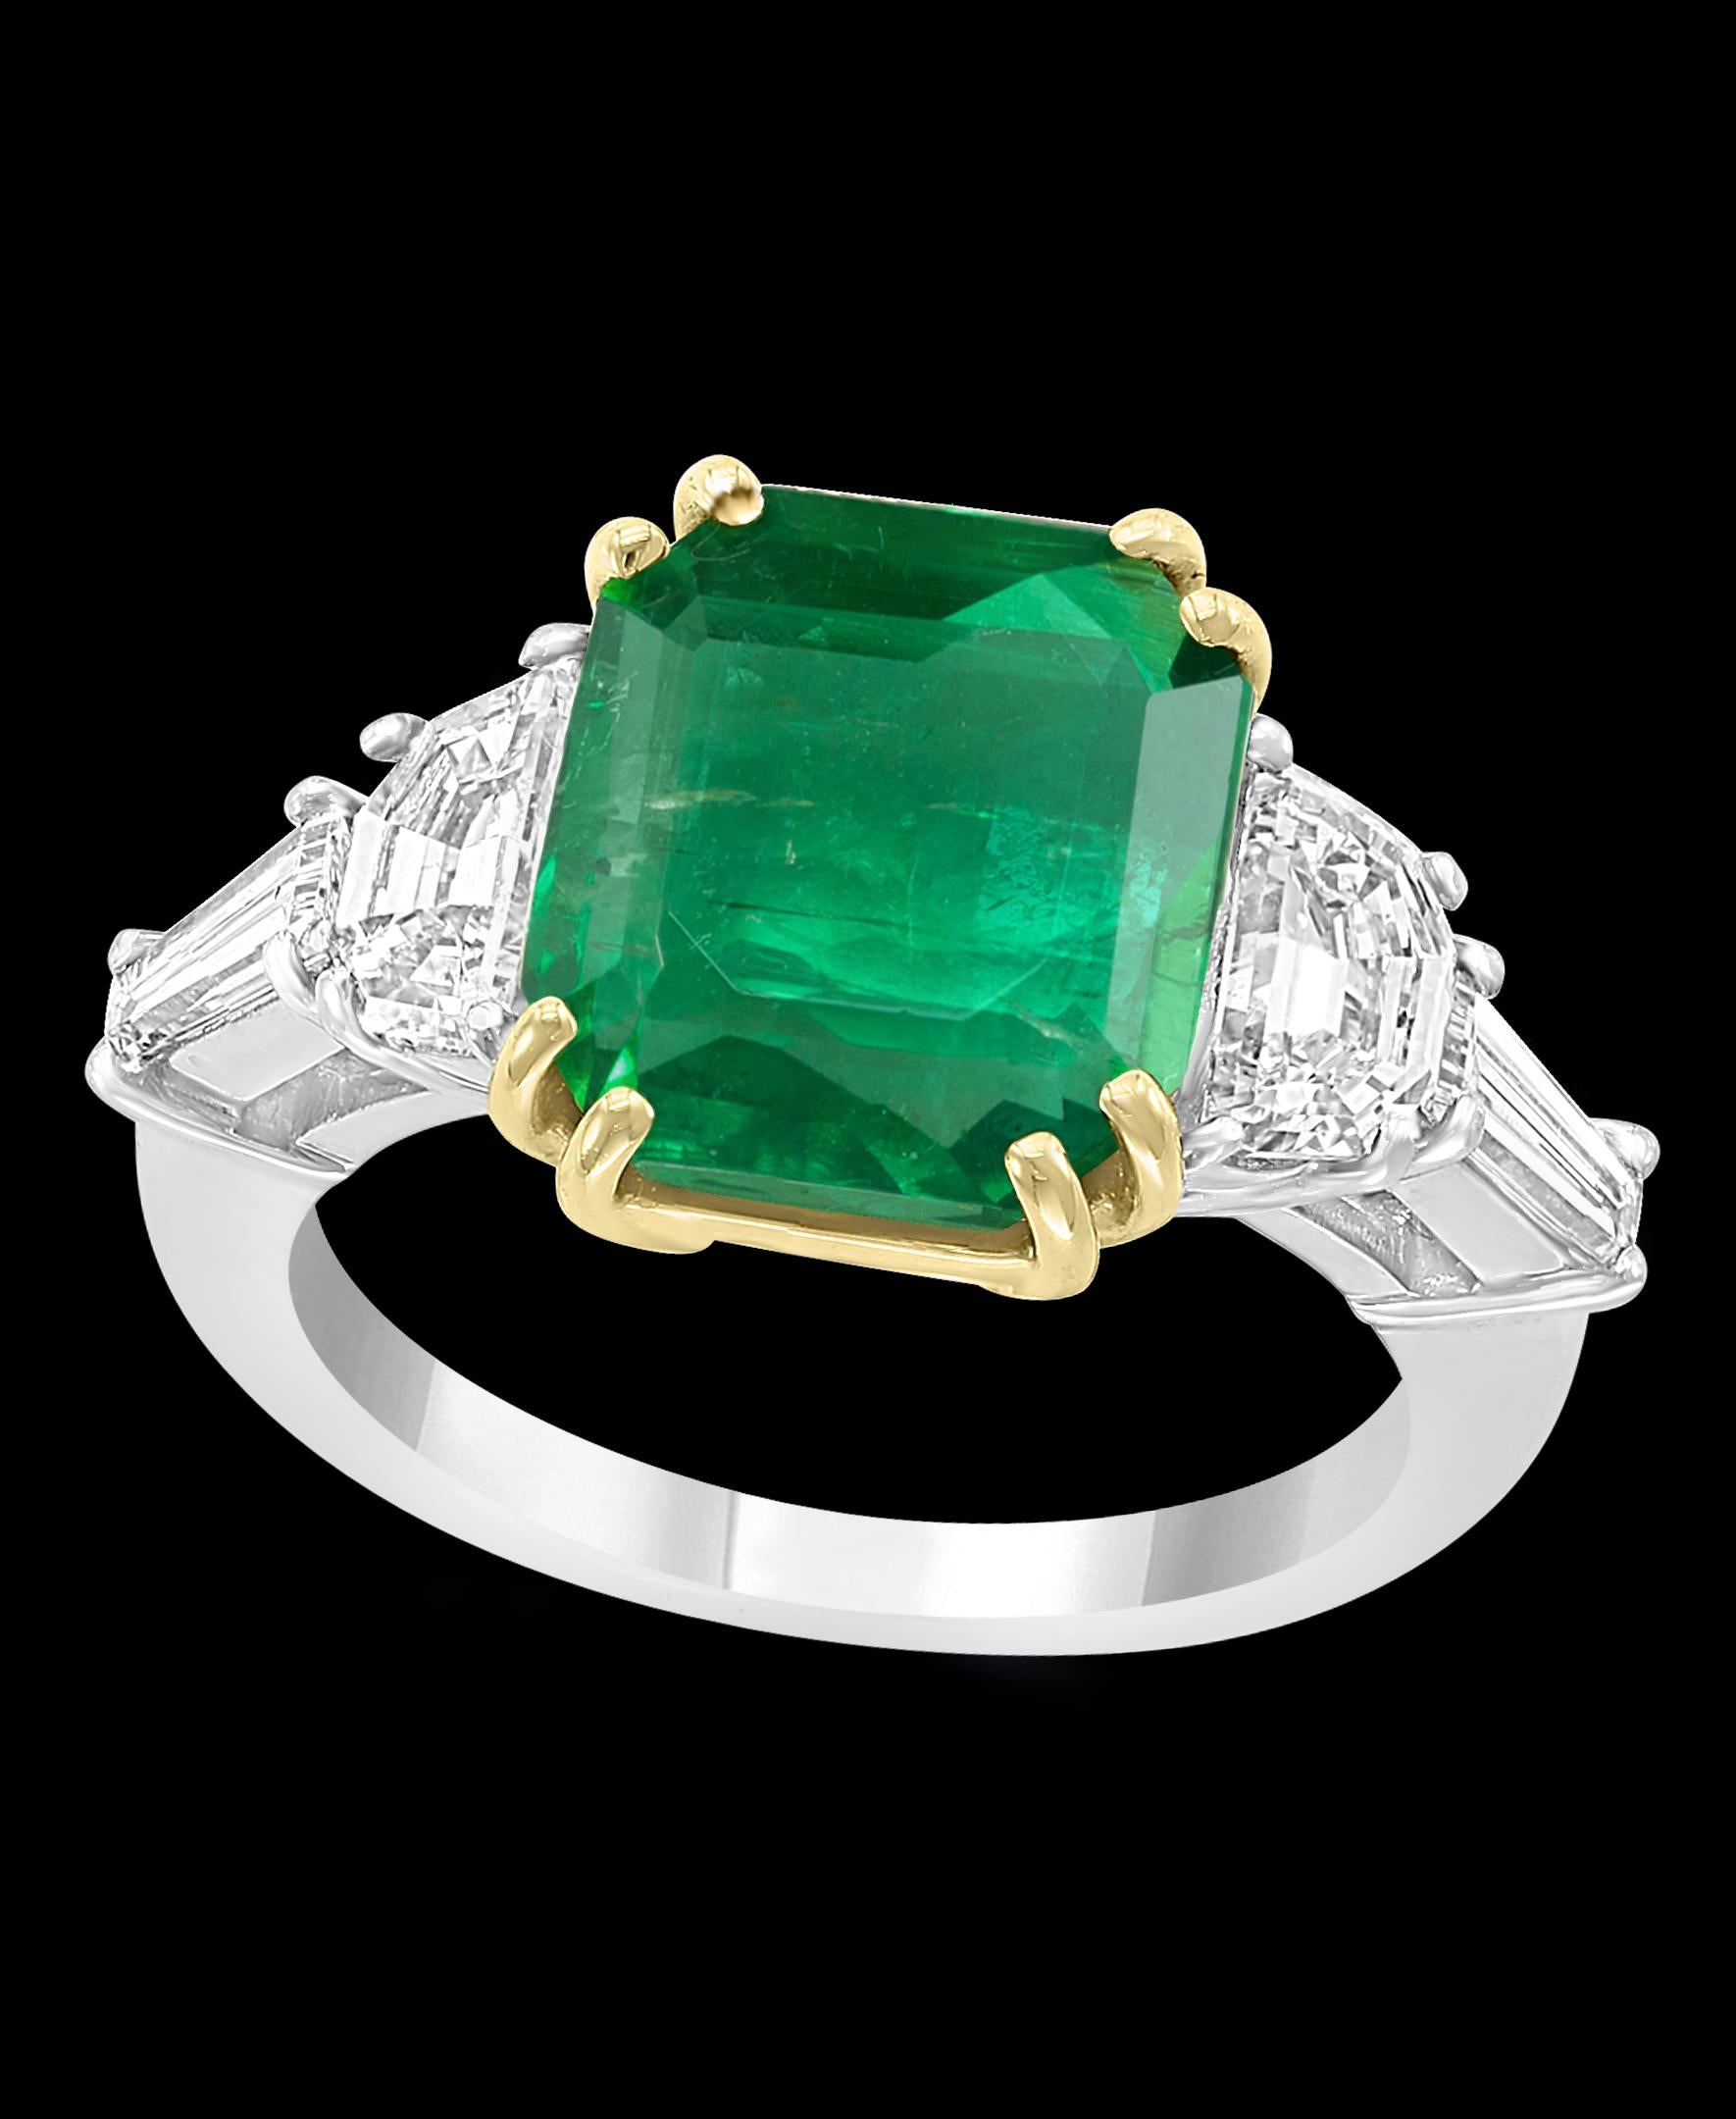 
AGL certified Minor Traditional AGL report # CS1078426
Natural Beryl
Emerald
5.29  Carat  Colombian Emerald and Diamond Ring
Origin Colombia
Clarity Enhancement : Minor
Type : Traditional 
Very high grade emerald as its not only minor in the